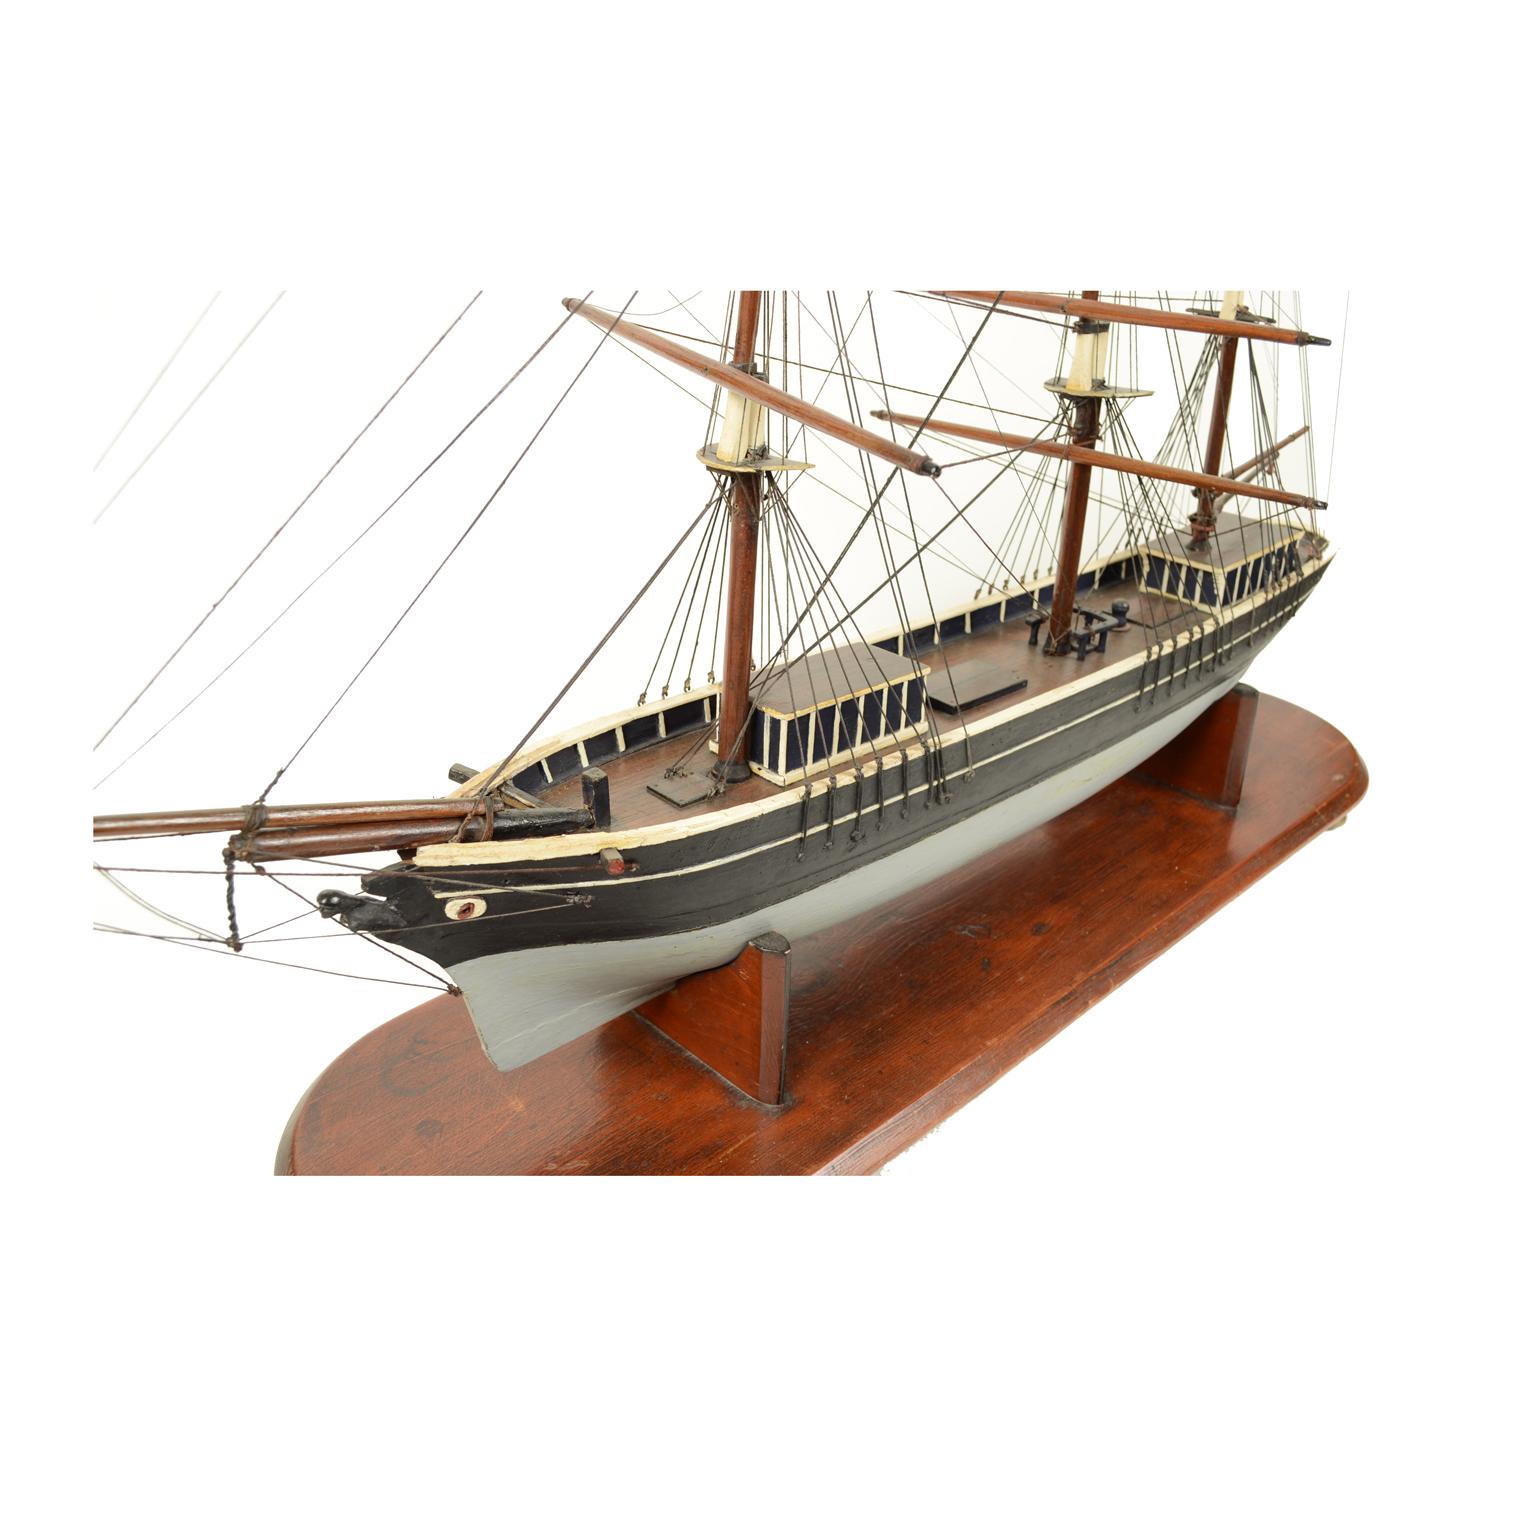 Scale model of a brig with three masts, UK early 1900, oak wooden hull, black hull and grey topsides, oak wooden base with turned feet. Very good condition. Measures: Length cm 106, height cm 79.